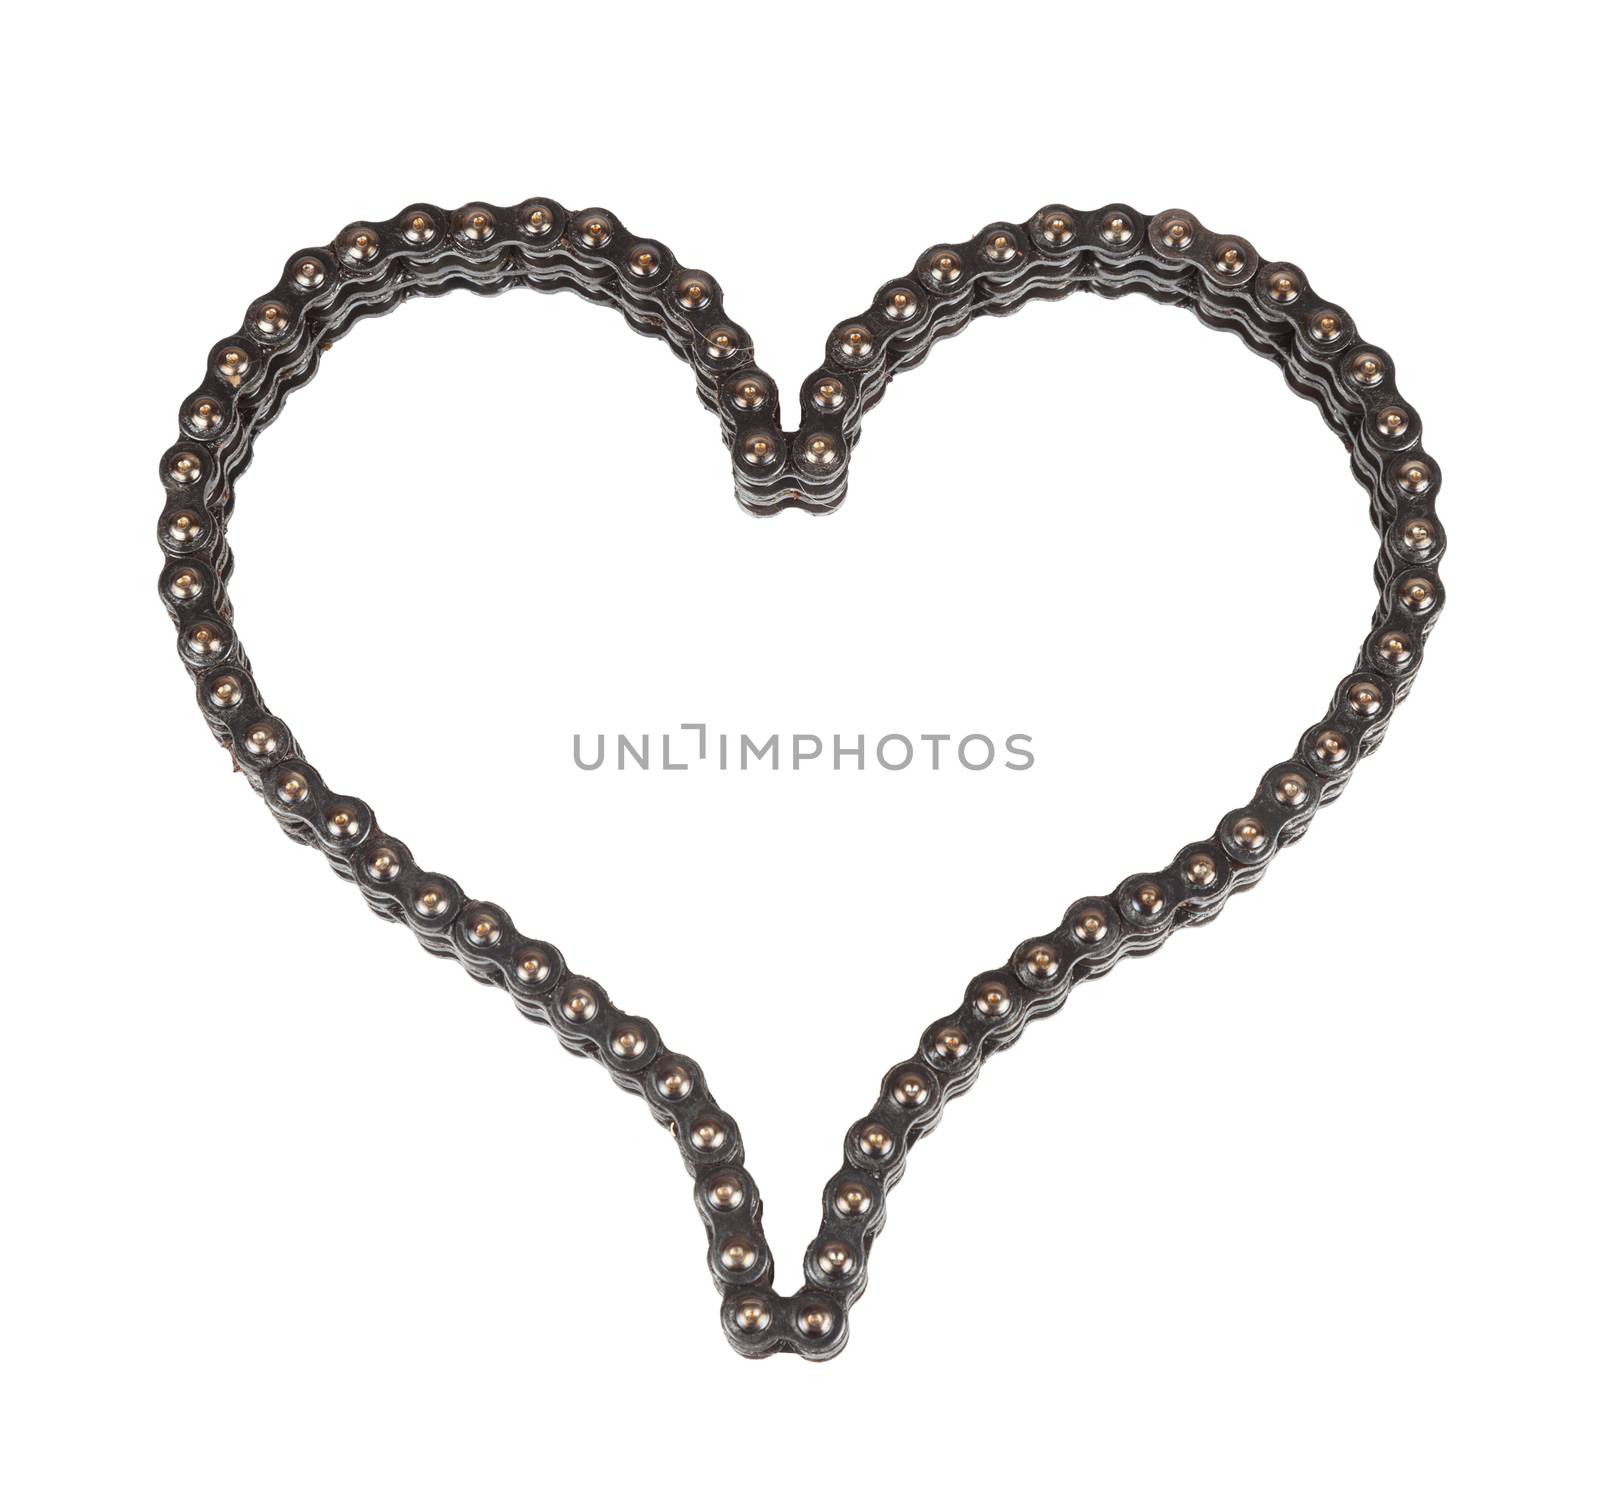 Roller chain with for motorcycle in the form of heart. Isolated on white background